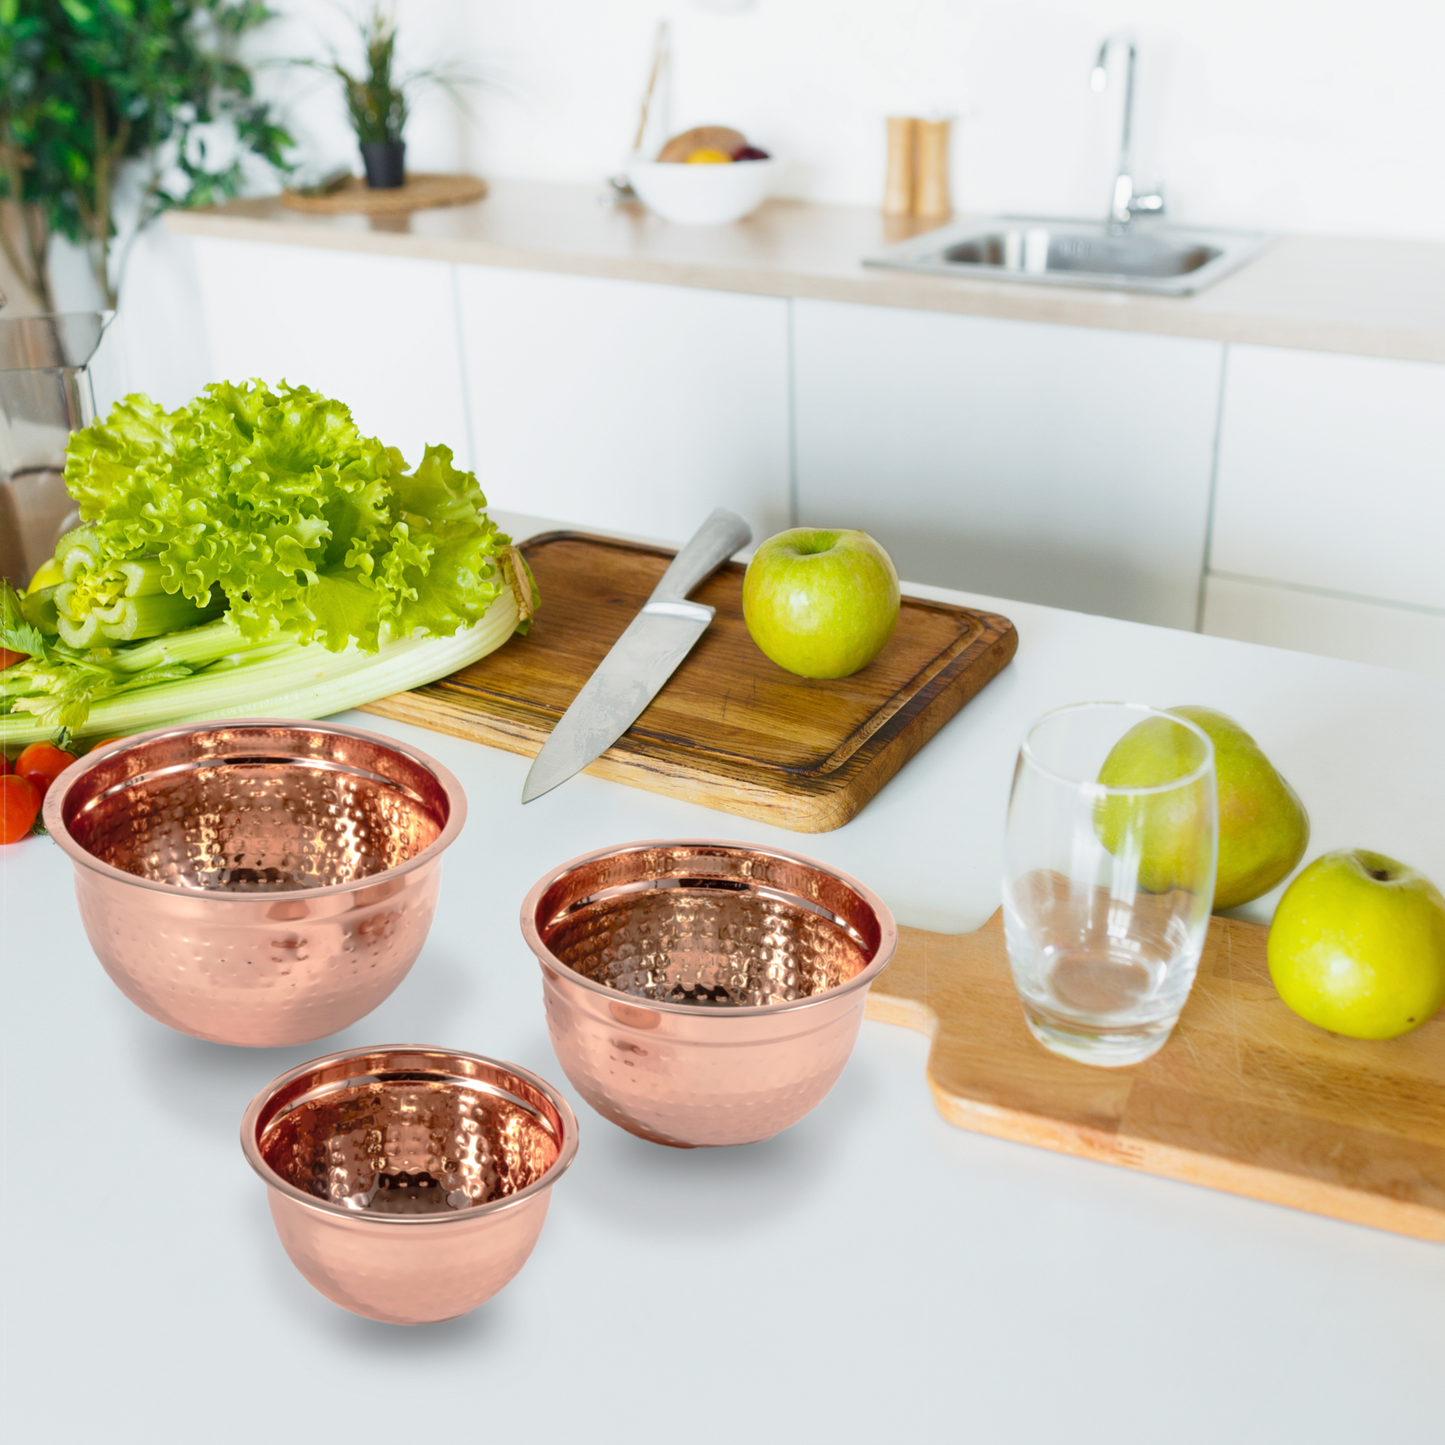 Copper Tone Stainless Steel Mixing Bowls Natural Finish Set of 3